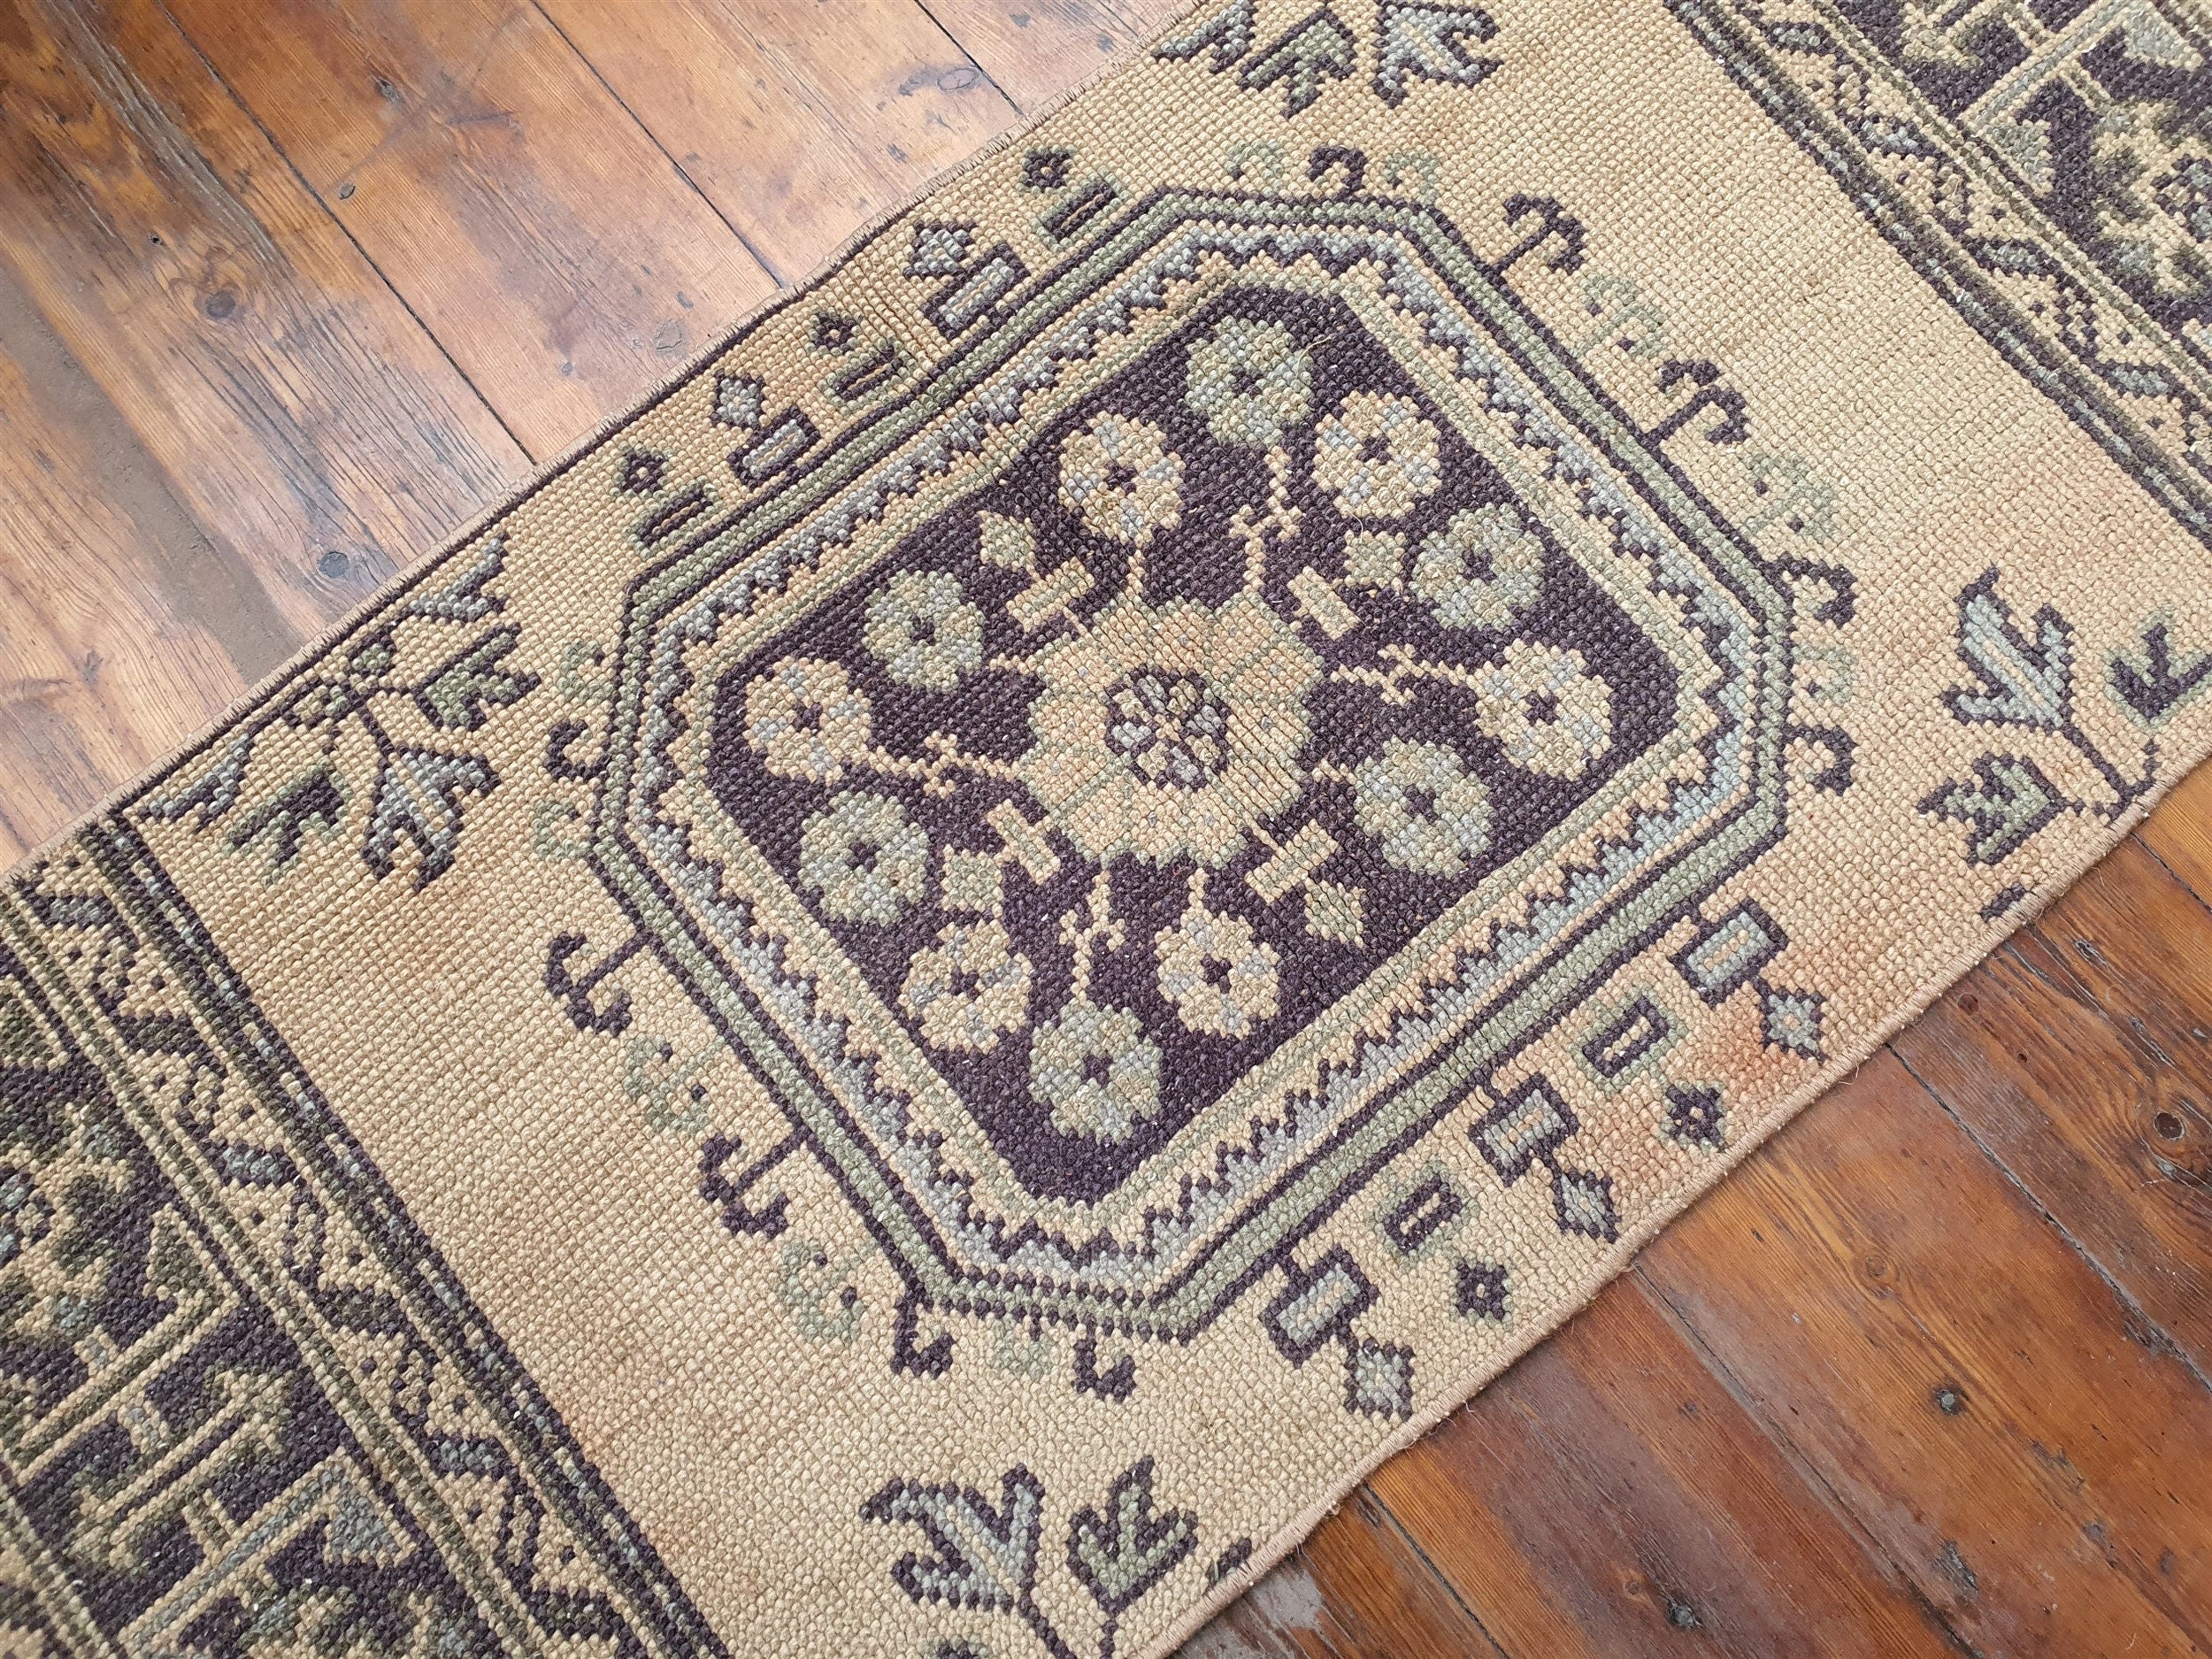 Small Turkish Rug, 4 ft 2 in x 1 ft 9 in, Apricot Orange and Teal Green Vintage Faded Distressed Door Mat